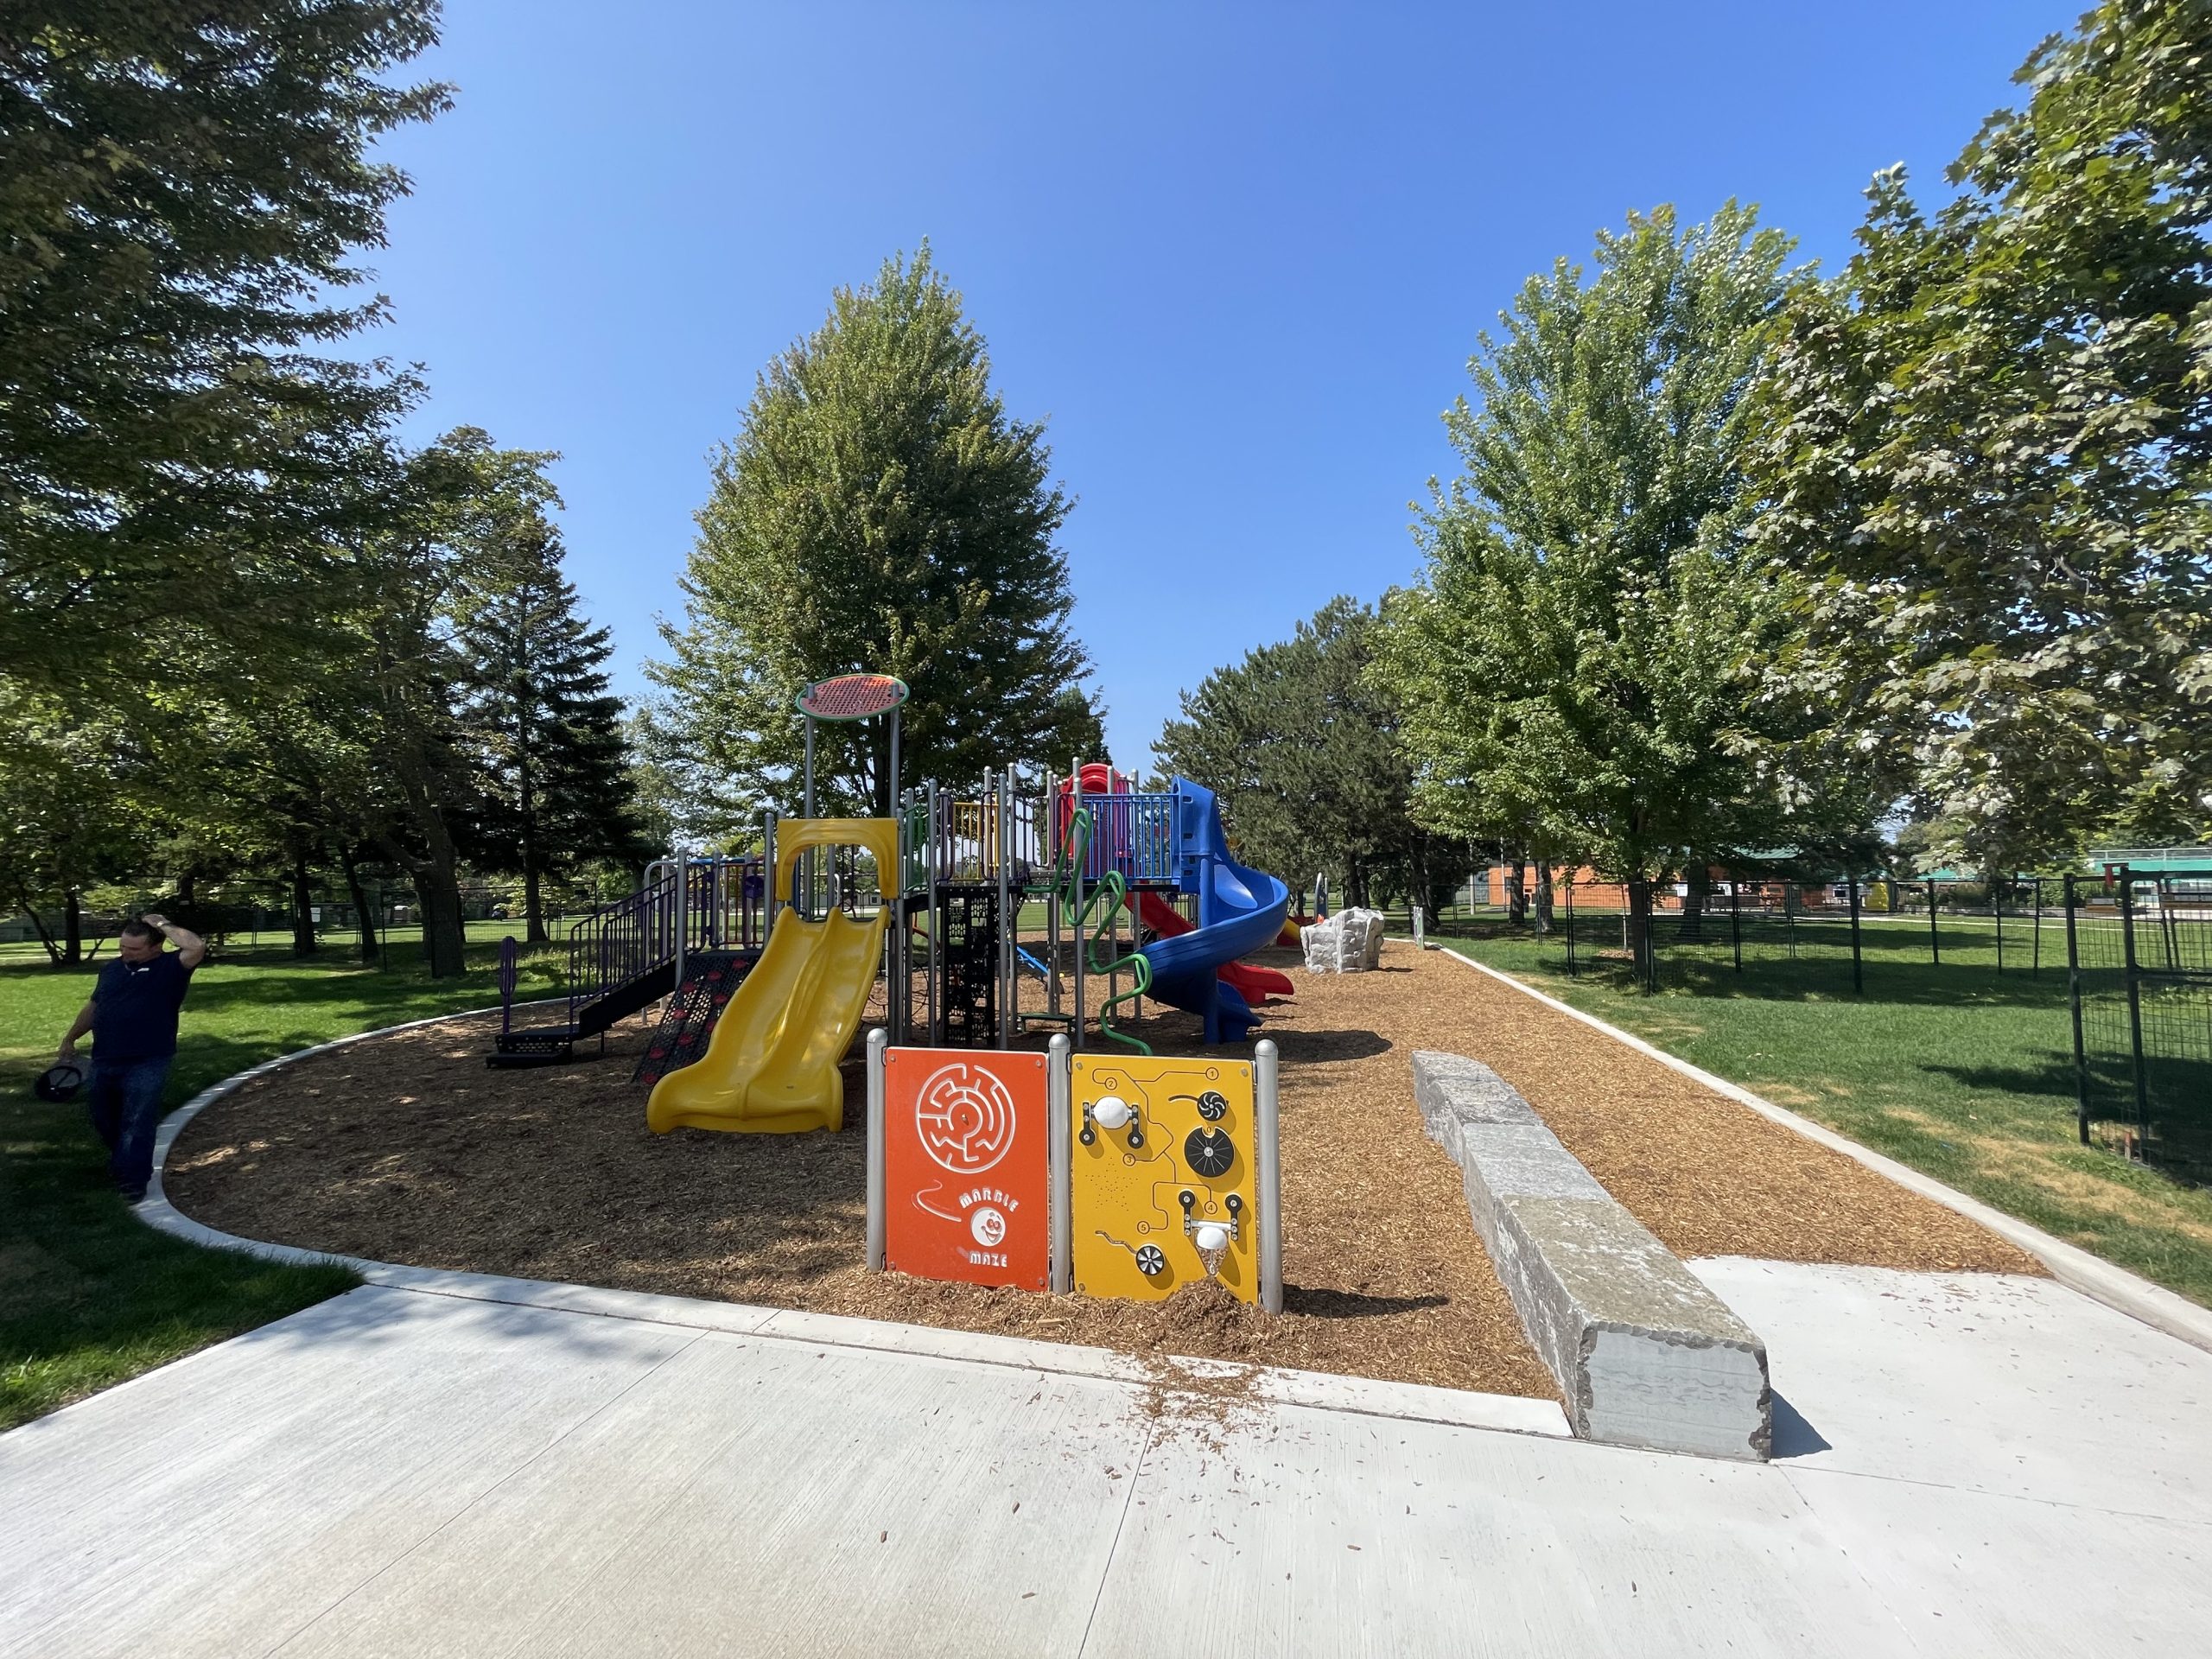 The new playground. The three slides are visible, along with some play panels. The mulch surfacing is surrounded by pavement.